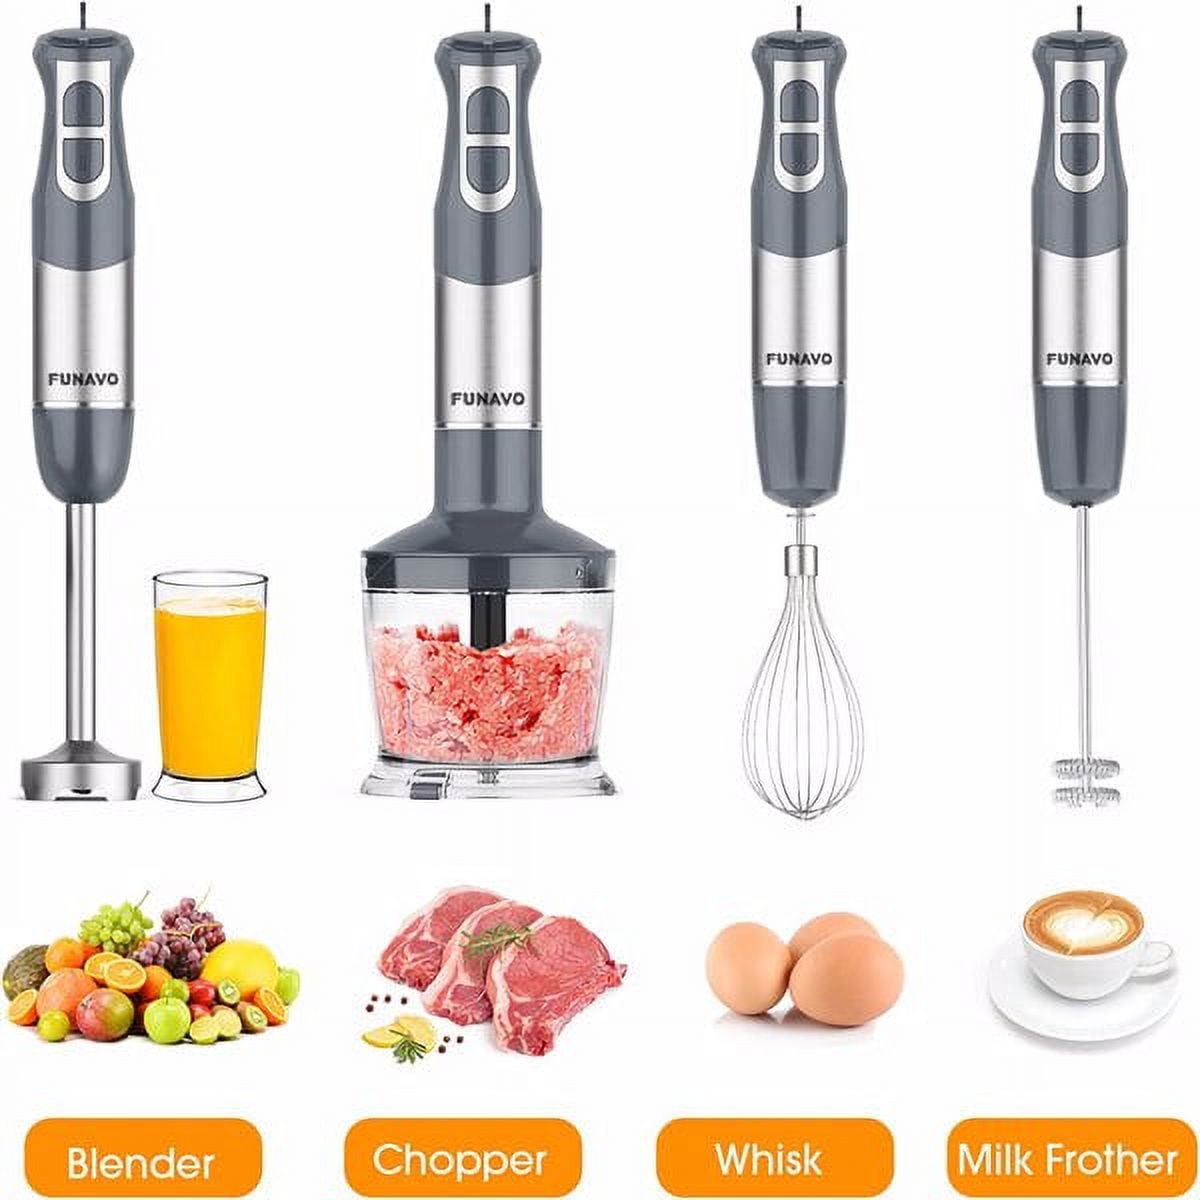 VIVEFOX 6-In-1 Immersion Hand Blender, 800W 10-Speed Powerful Stainless  Steel Stick Blender with Milk Frother, Egg Whisk 